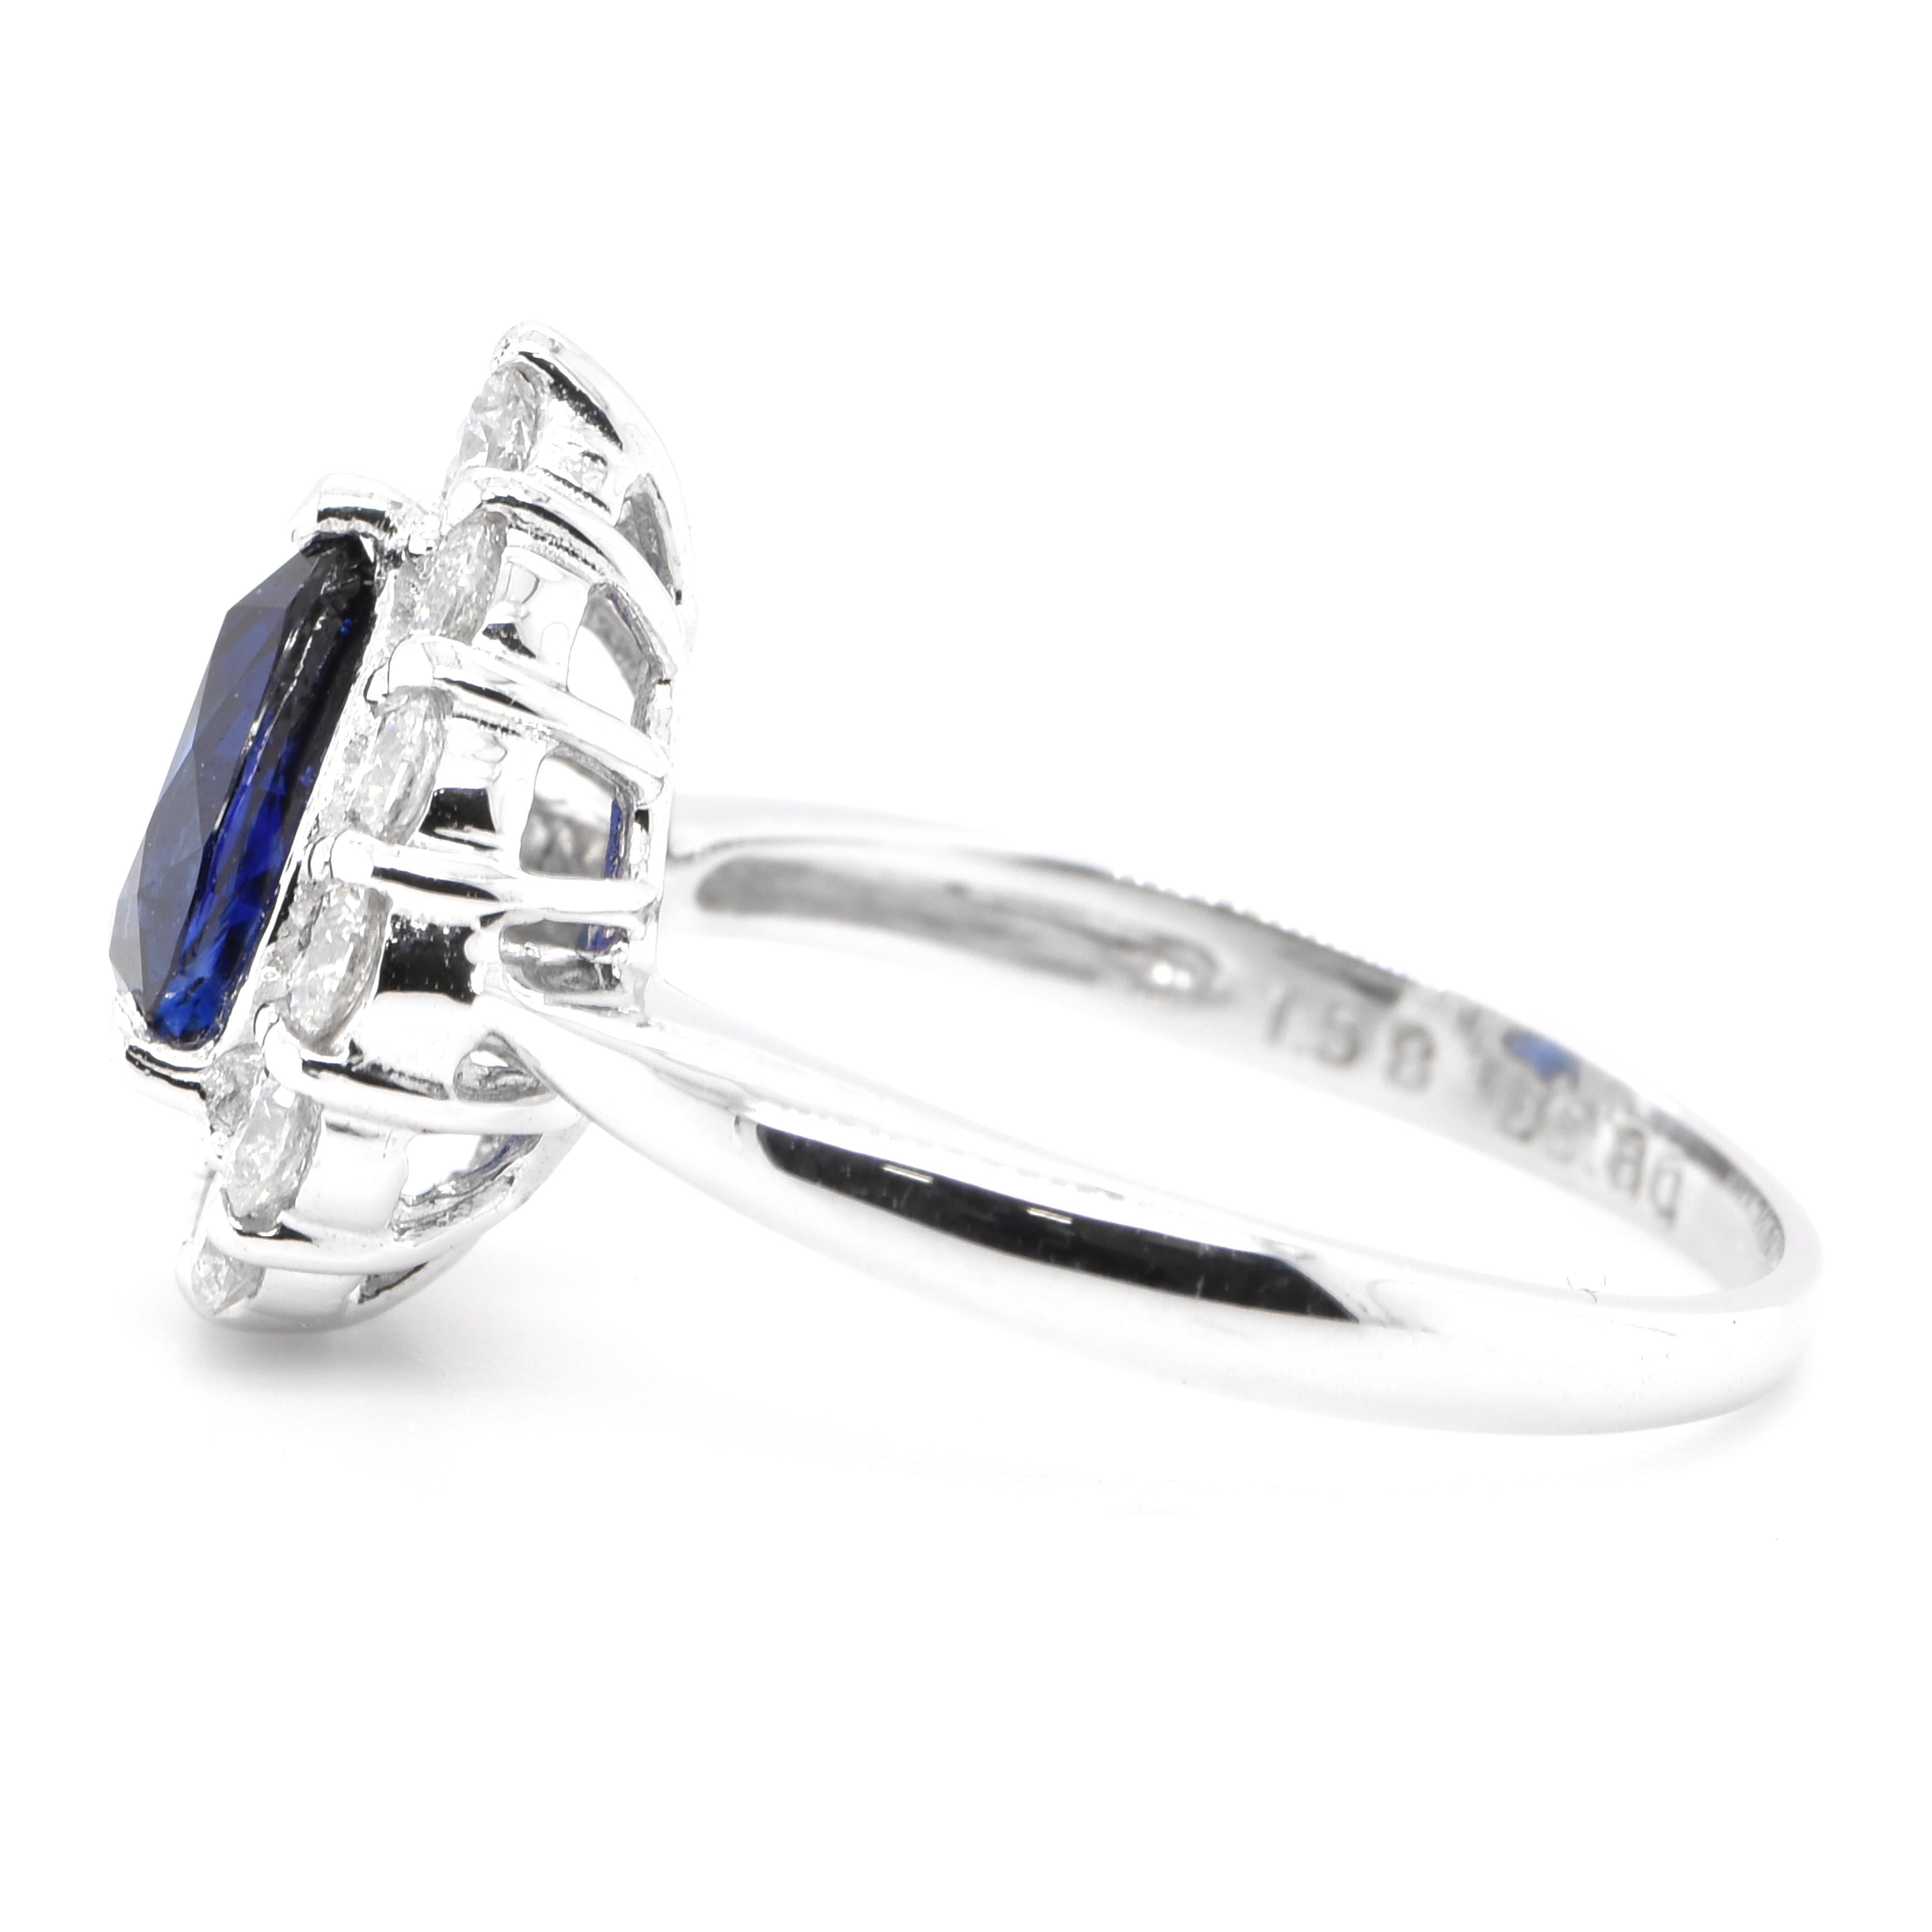 Pear Cut GIA Certified 1.58 Carat Natural Ceylon Royal Blue Sapphire Ring Set in Platinum For Sale